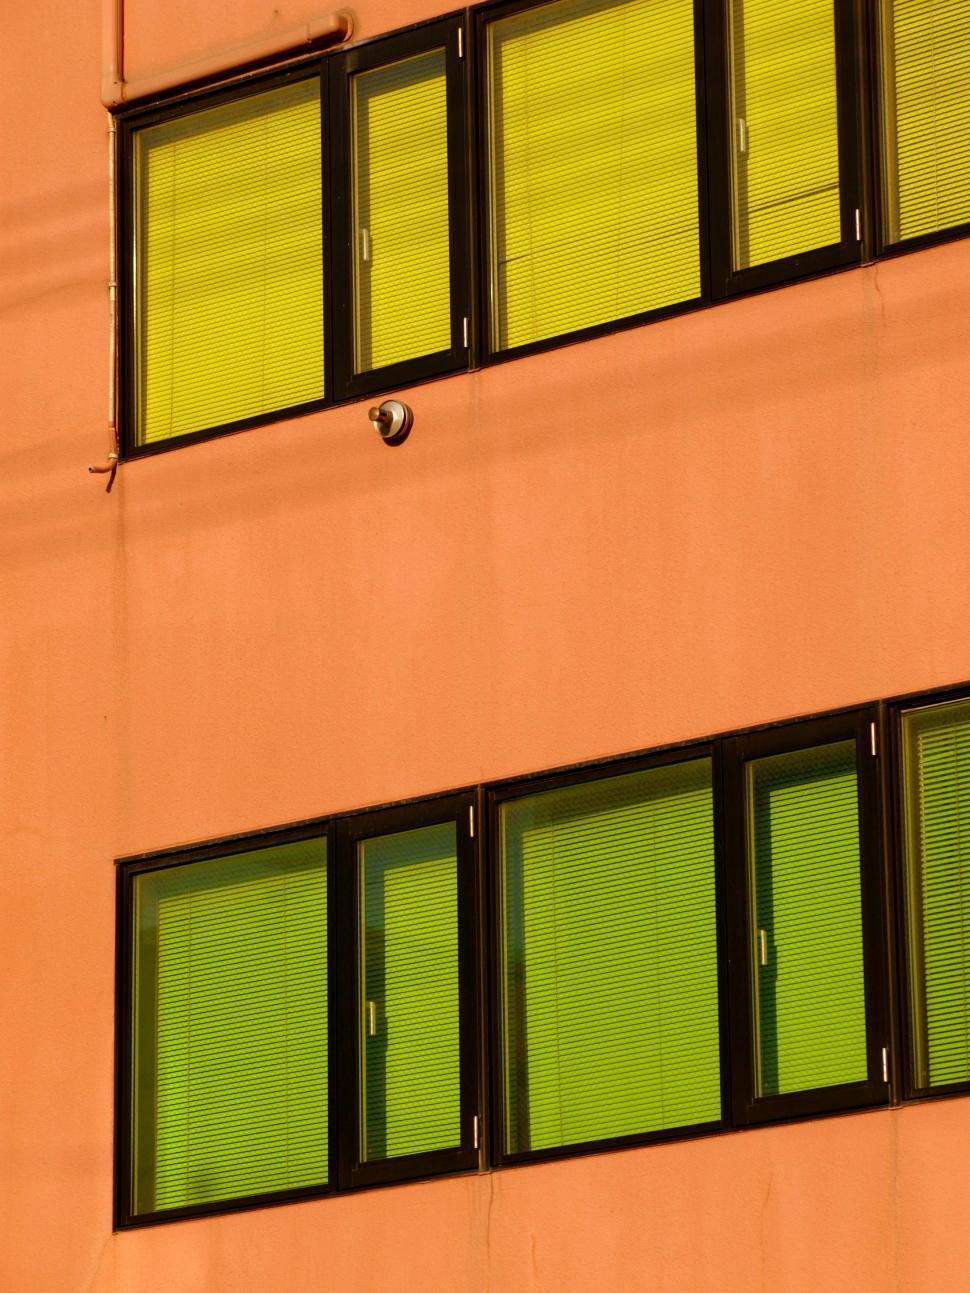 Free Image of Geometric architecture and green windows 